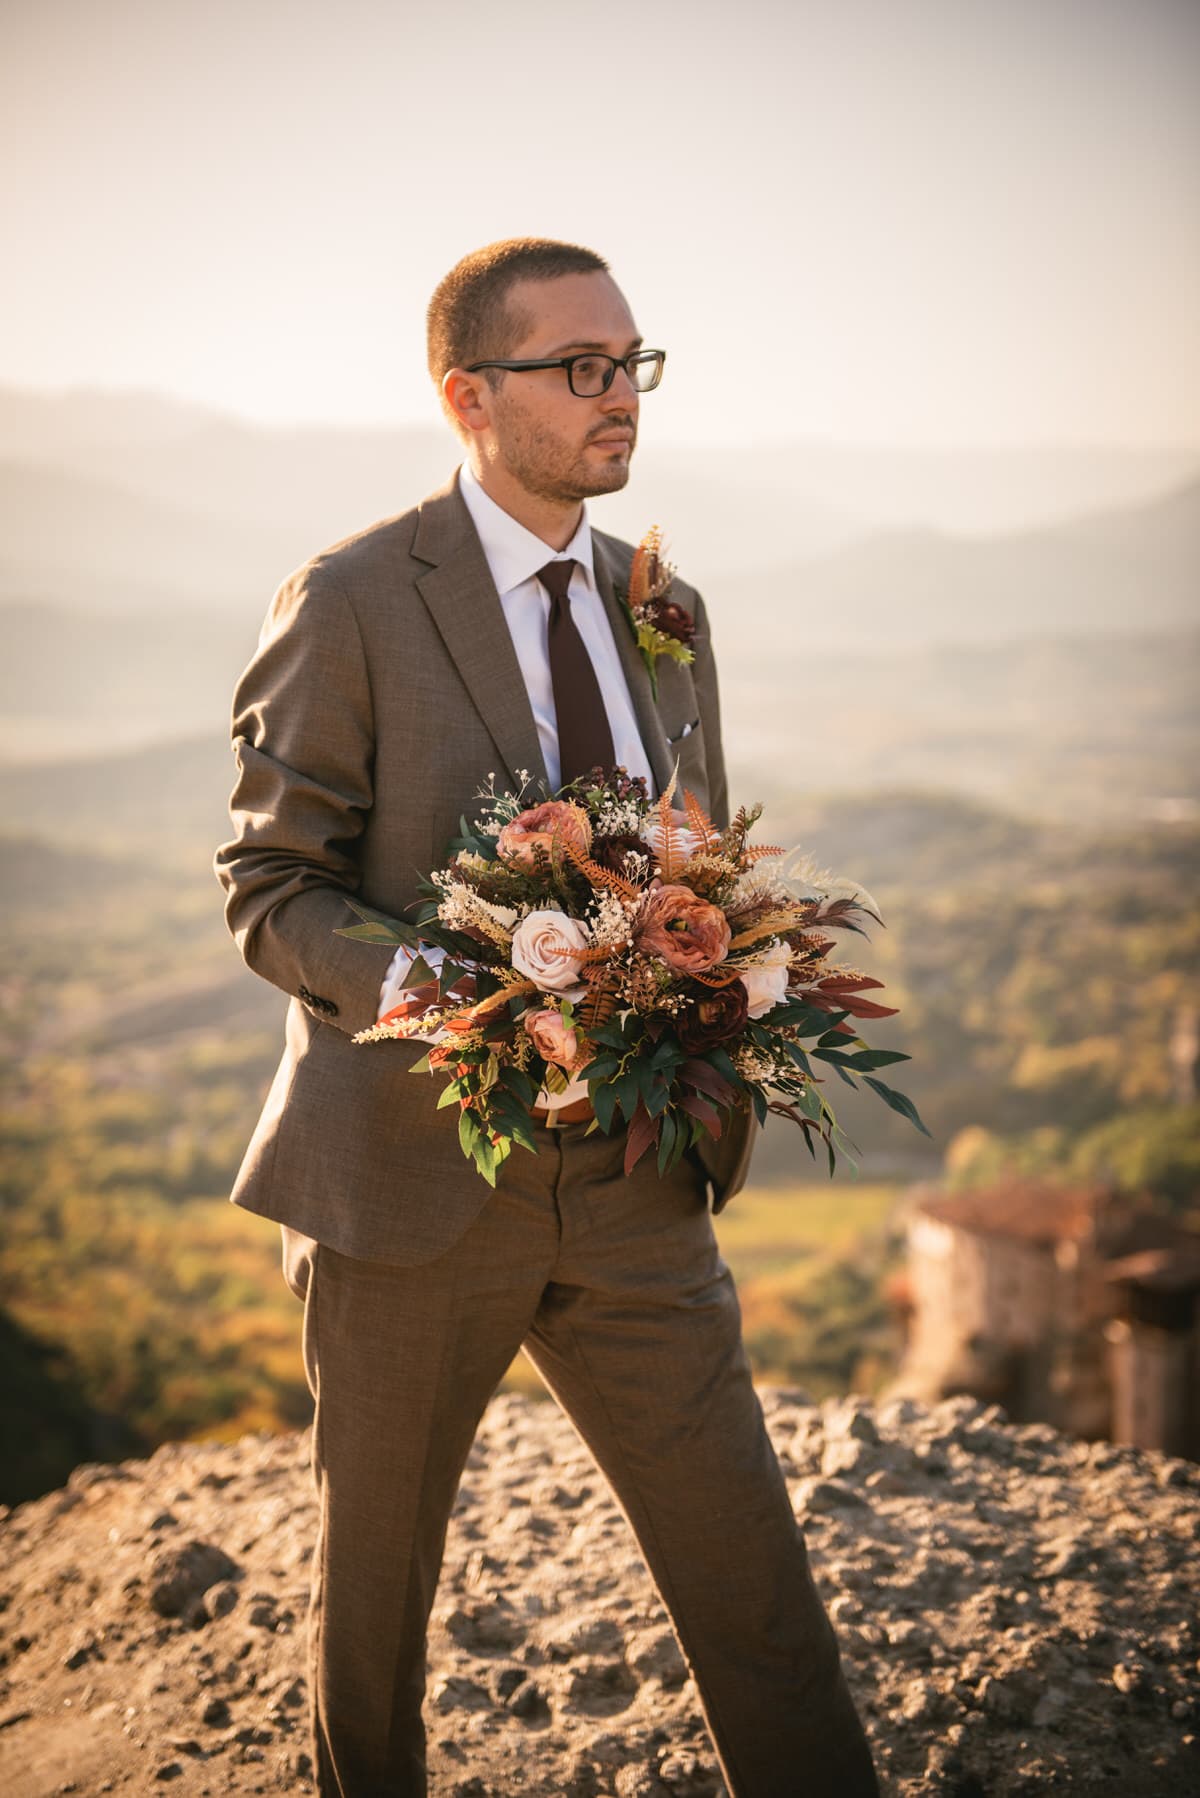 Groom holding the flowers on an elopement day in the Meteora